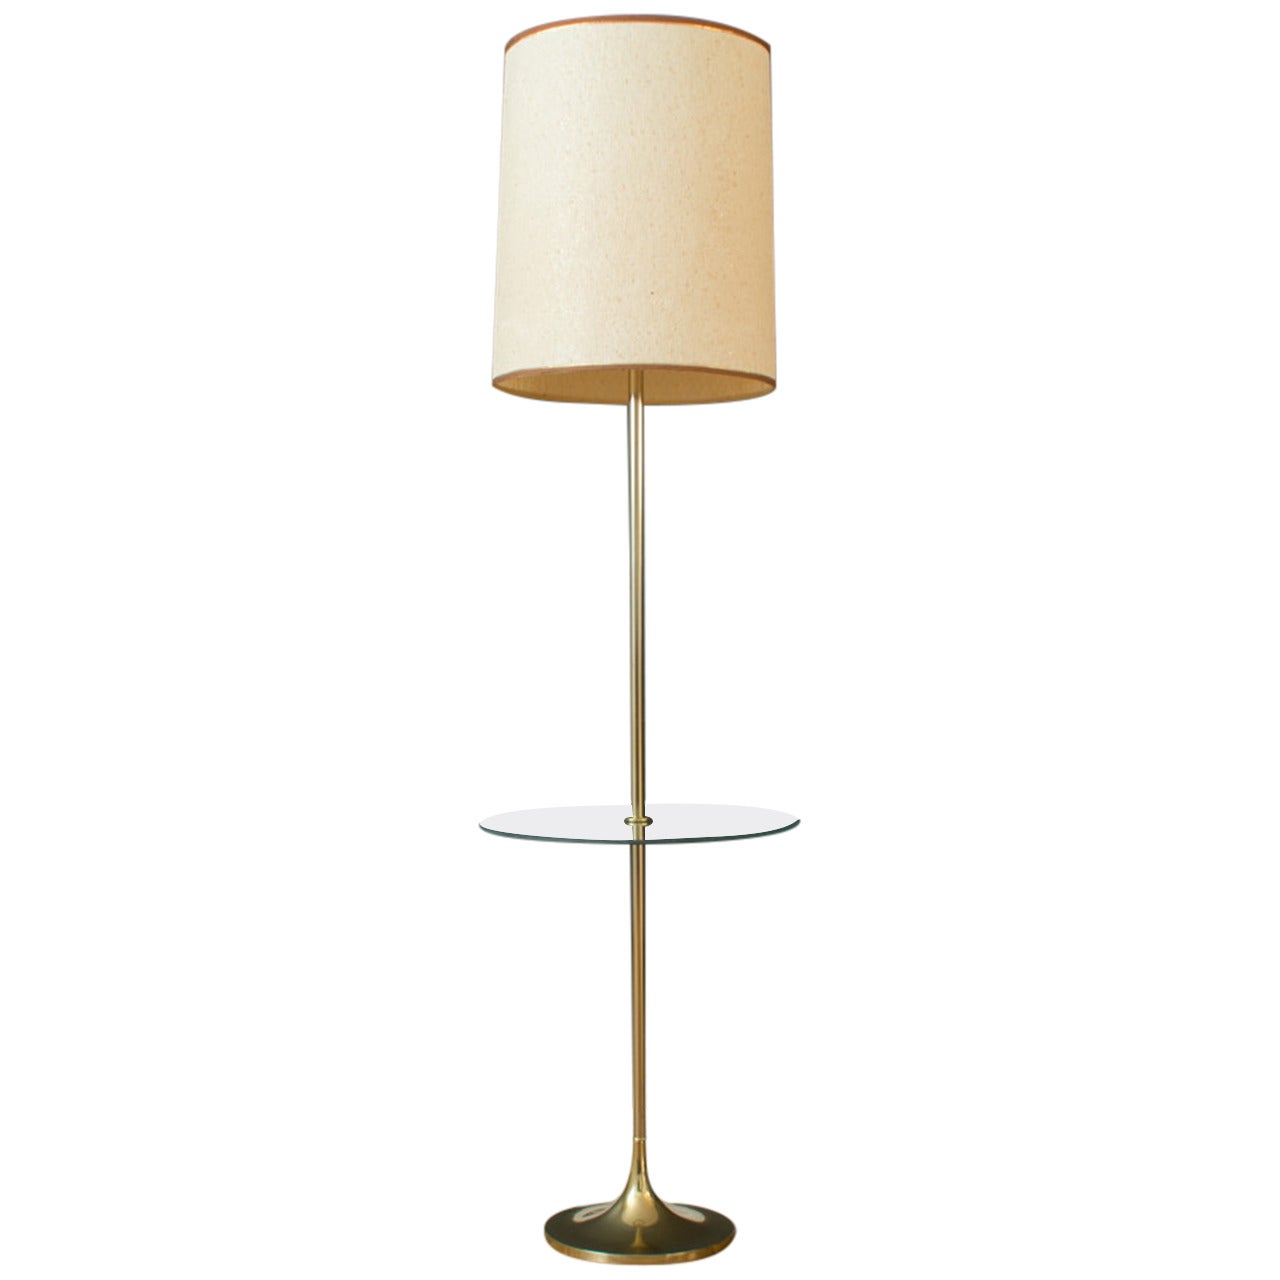 Mid-Century Modern Floor Lamp with Side Table by Laurel Lamp Mfg.